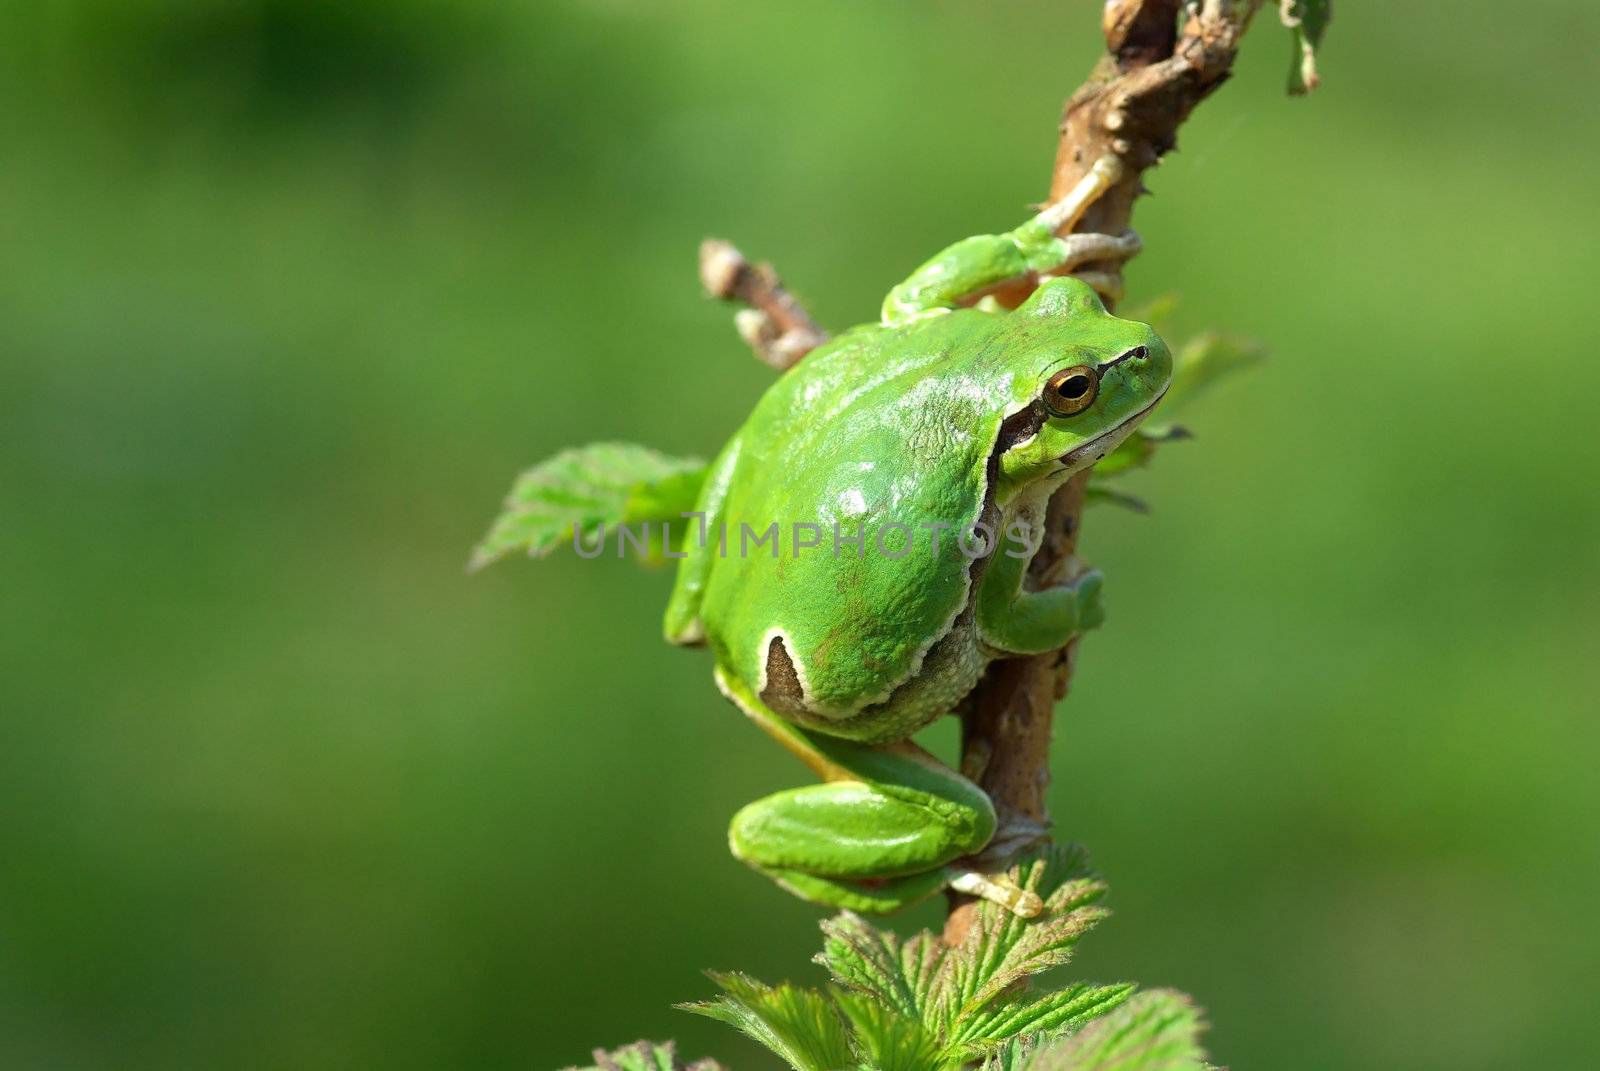 Hyla arborea. Common or European tree frog in the forest.